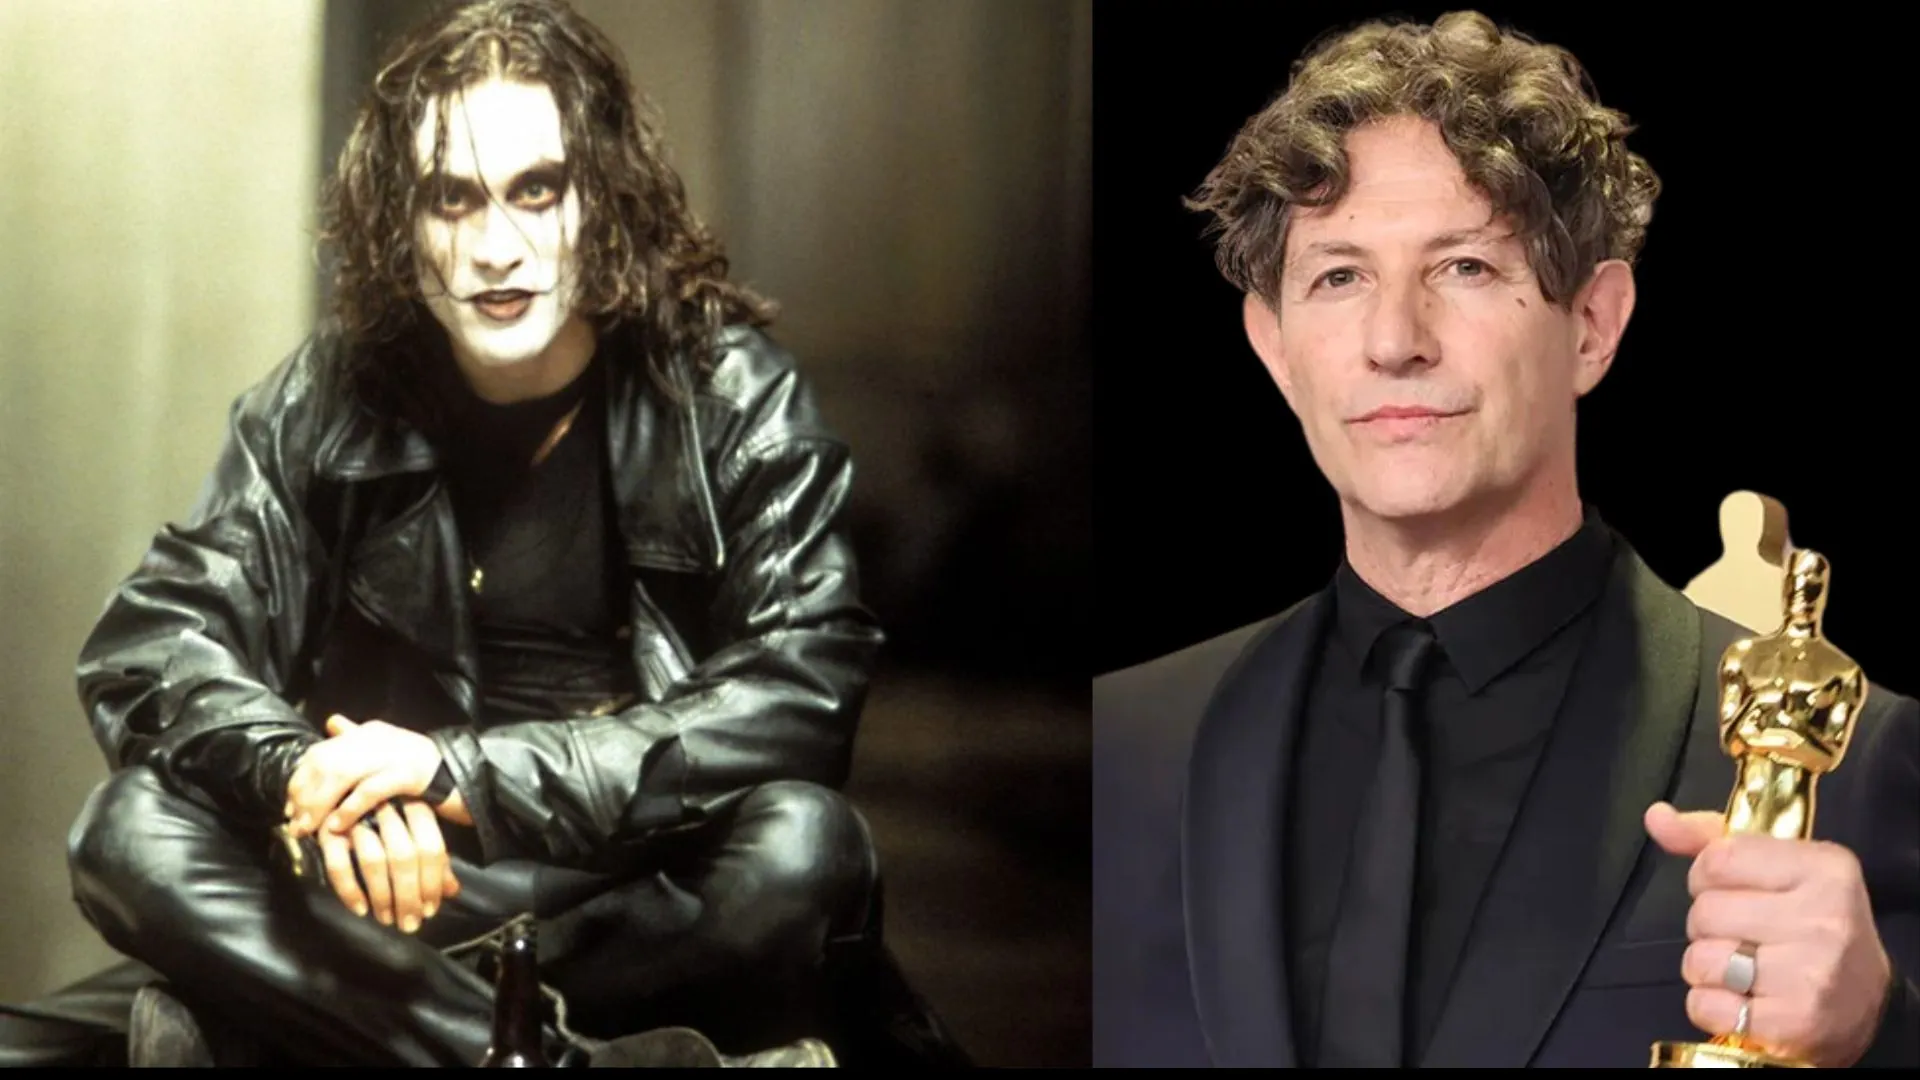 The Crow Returns: Remake Pays Tribute to Brandon Lee's Tragic Loss